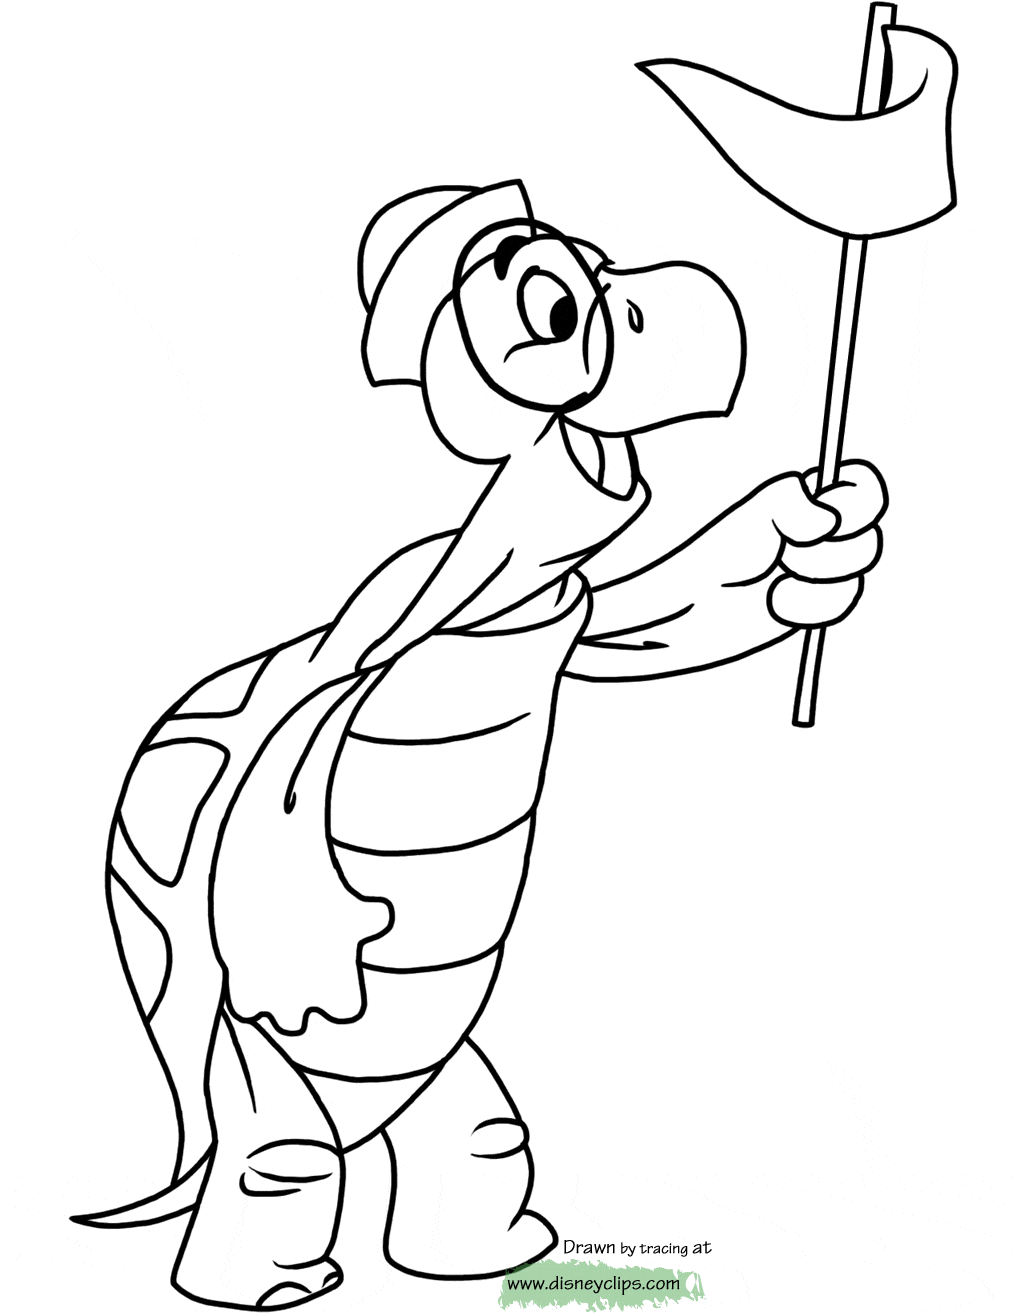 Robin Hood Coloring Pages | Disney Coloring Book